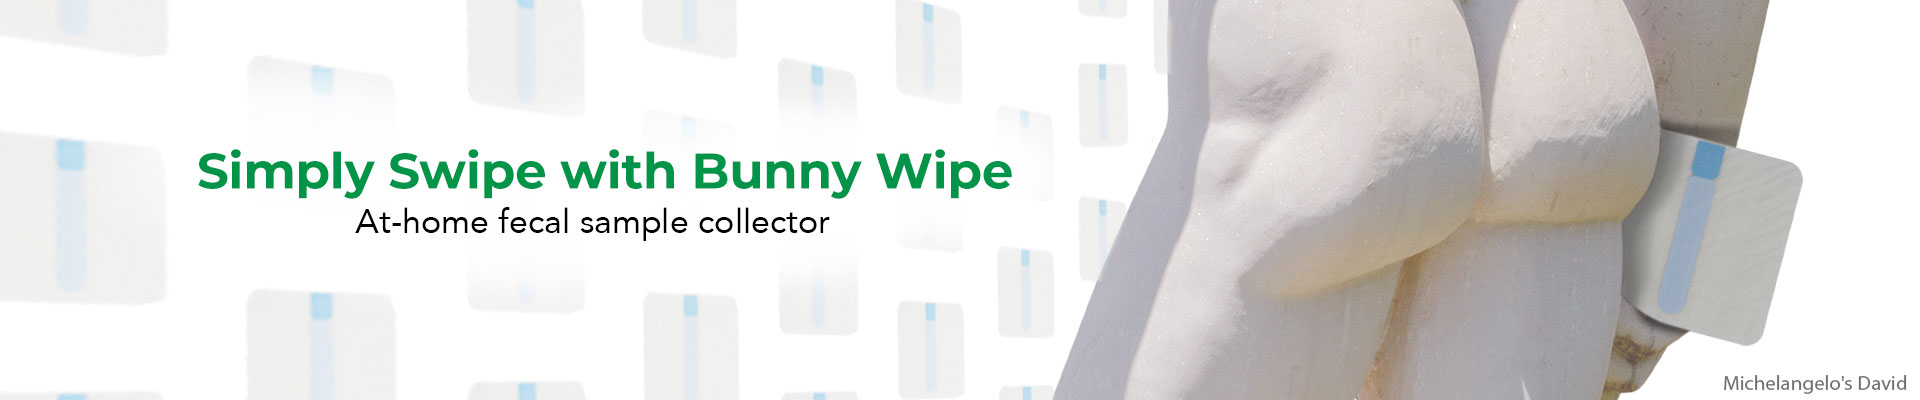 Banner for Zymo Research's Bunny Wipe stool collector device